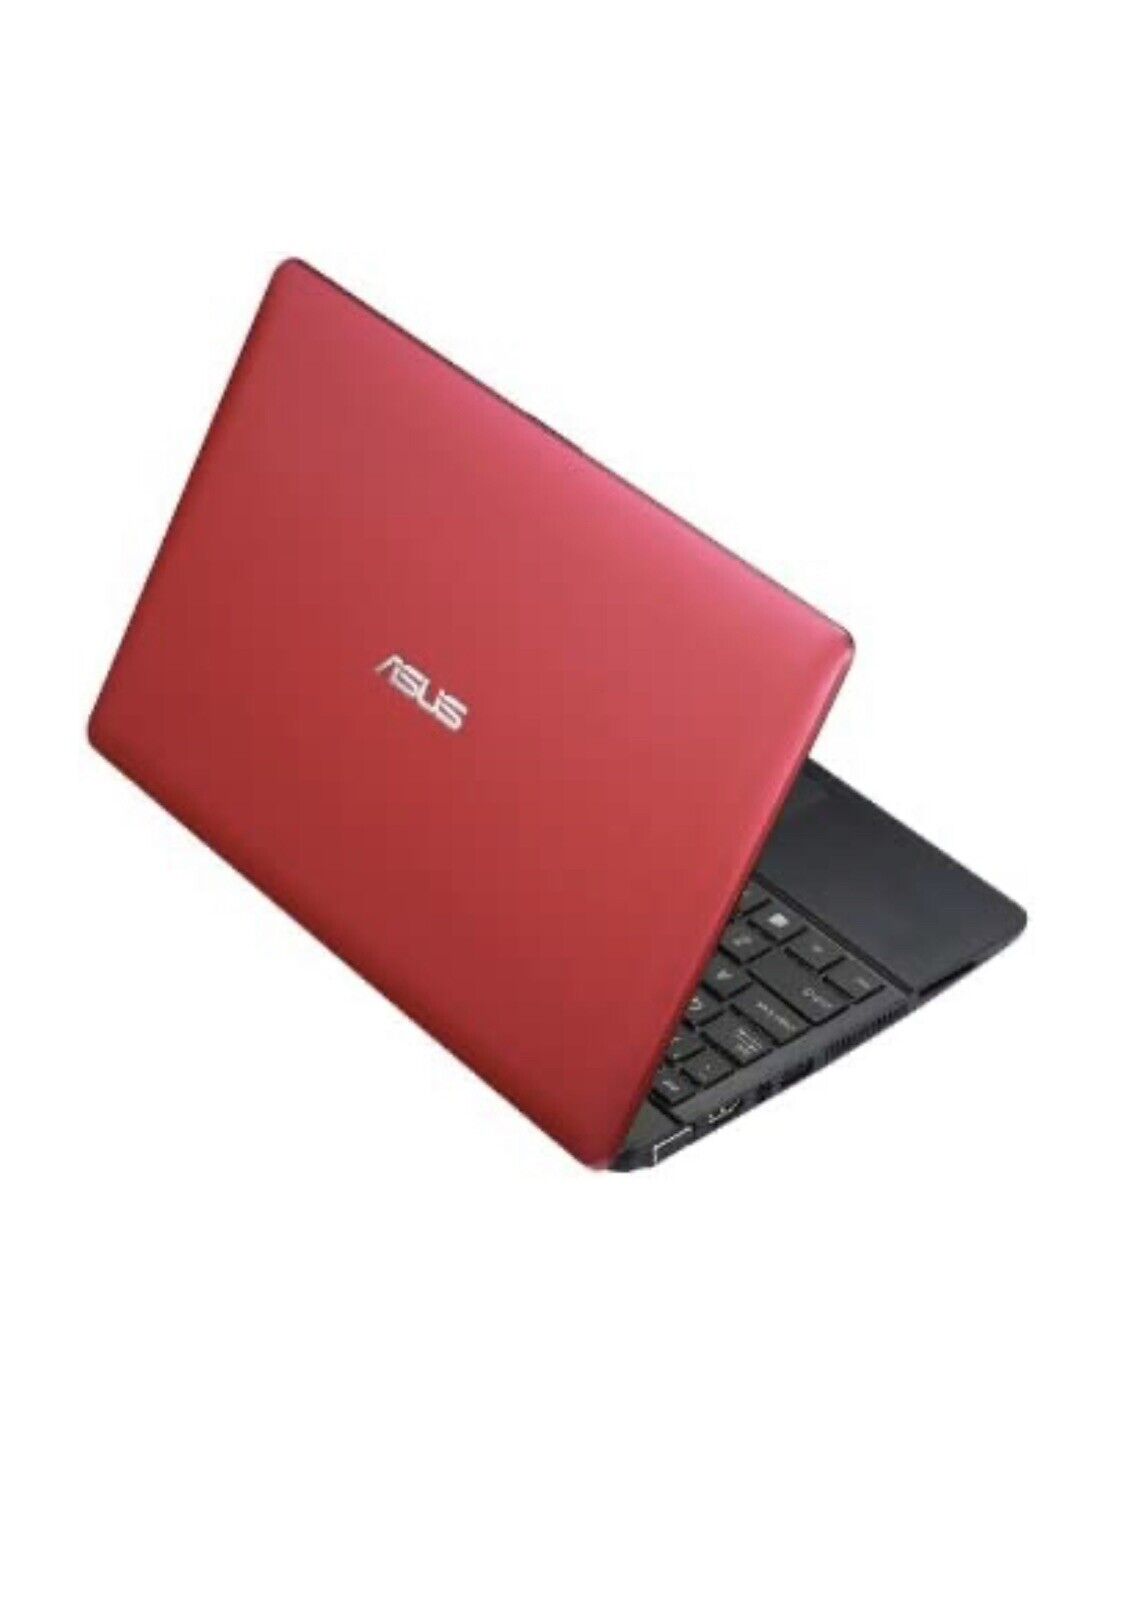 ASUS  X102BA-BH41T 10.1 inch Touchscreen Laptop-Pink